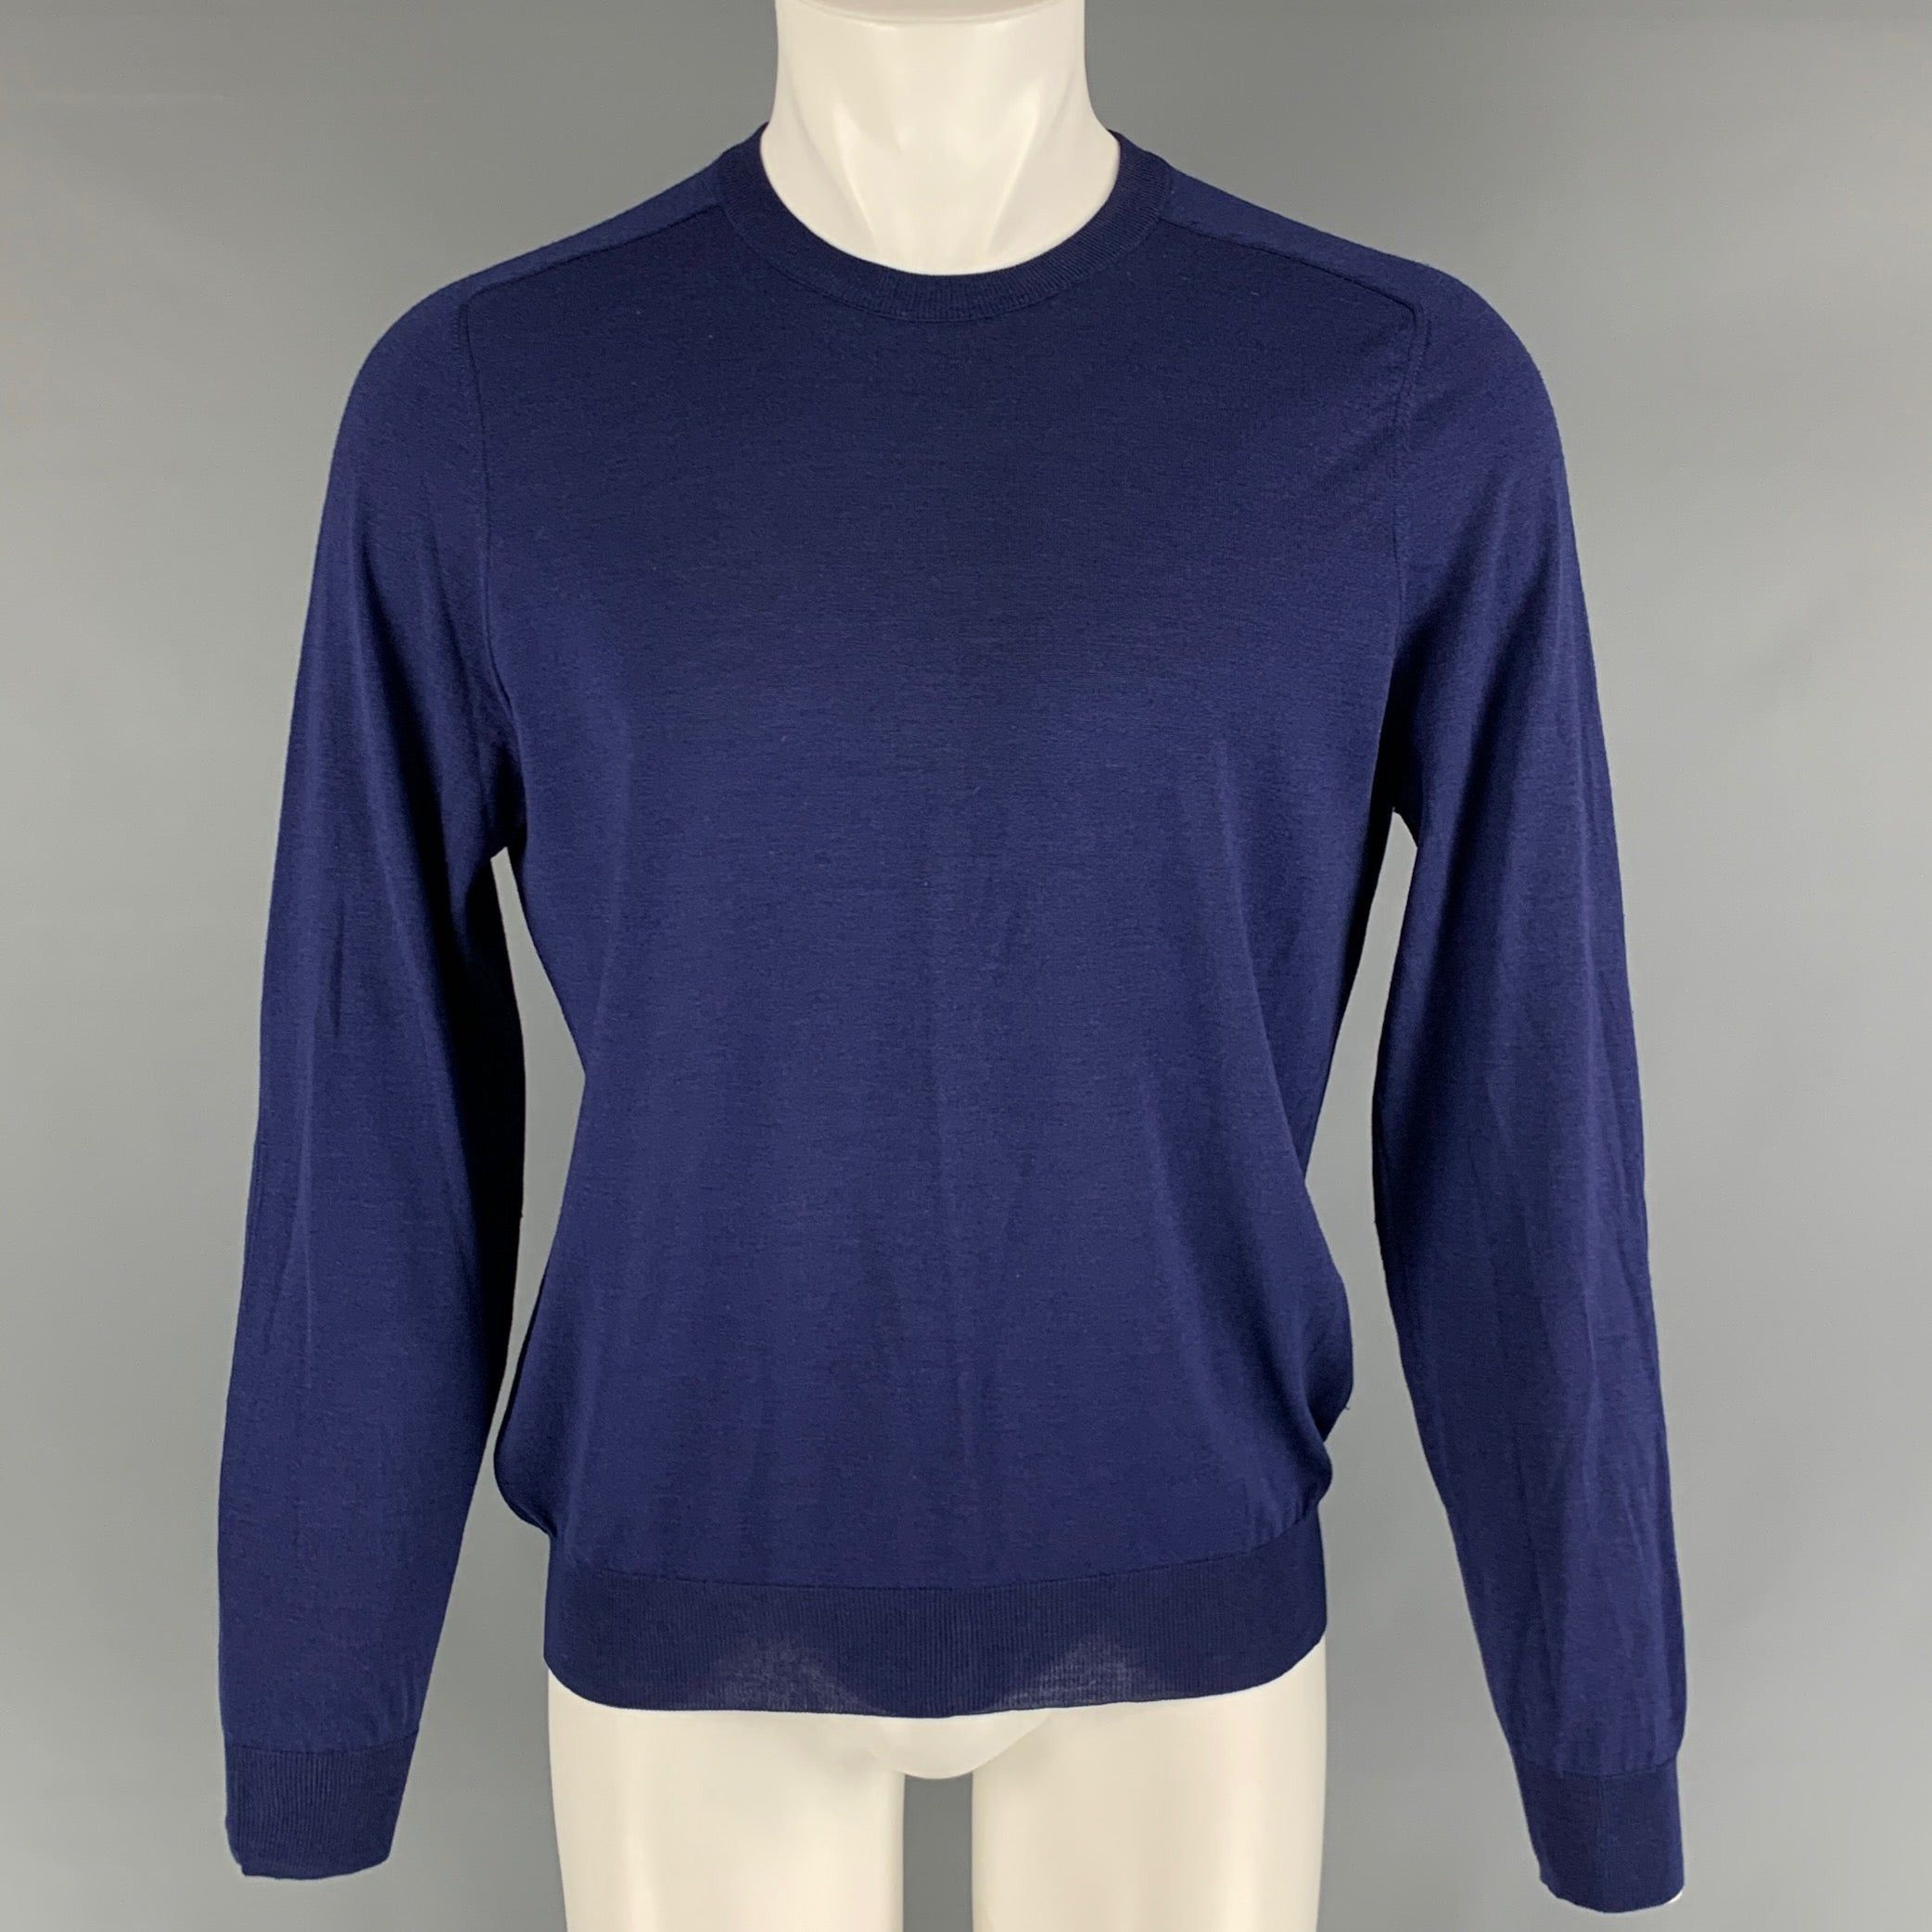 Louis Vuitton - Authenticated Knitwear - Wool Blue Plain for Women, Very Good Condition